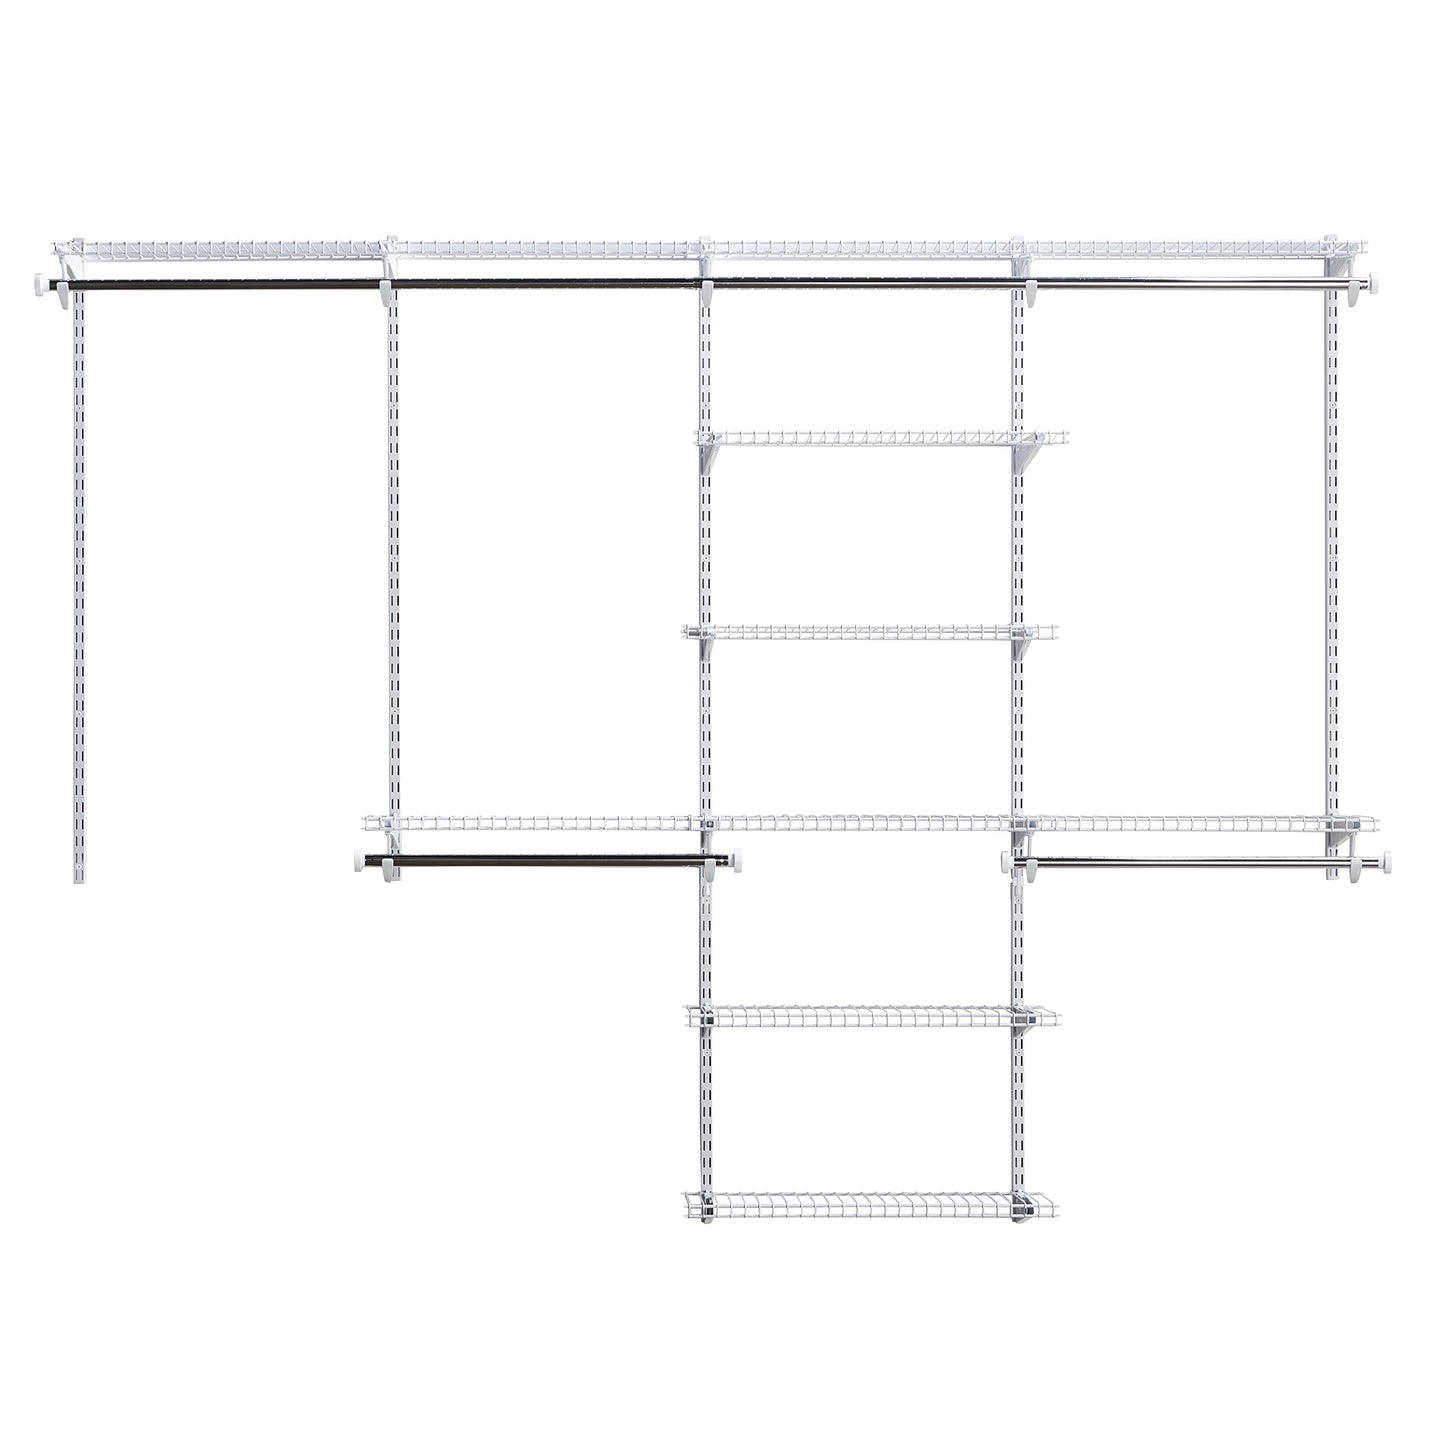 Rubbermaid Configurations Deluxe Closet Kit, White, 4-8 Ft., Wire Shelving Kit with Expandable Shelving and Telescoping Rods, Custom Closet